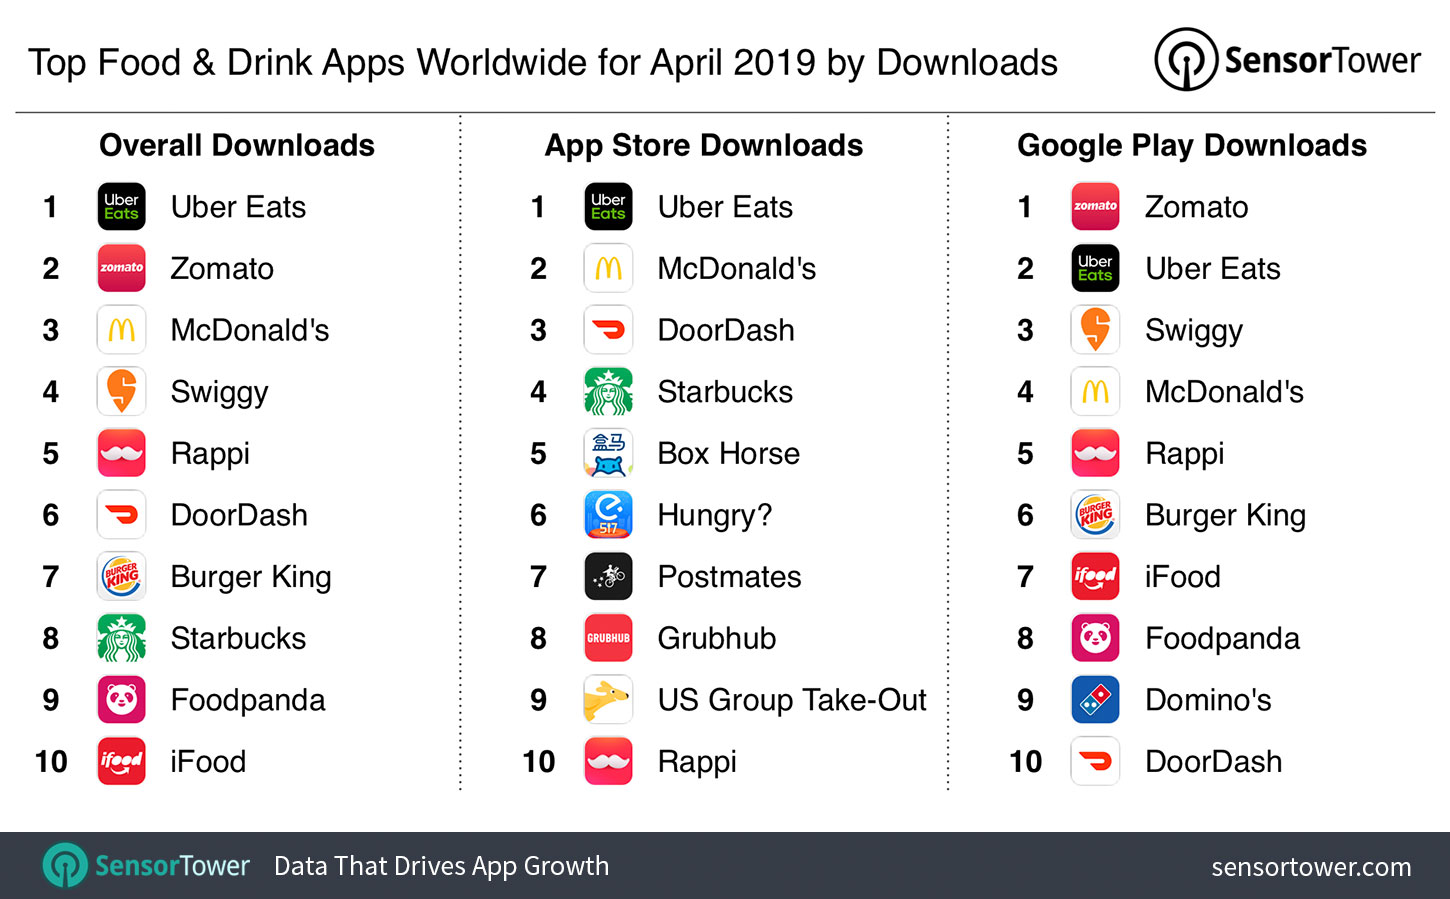 Top Food & Drink Apps Worldwide for April 2019 by Downloads